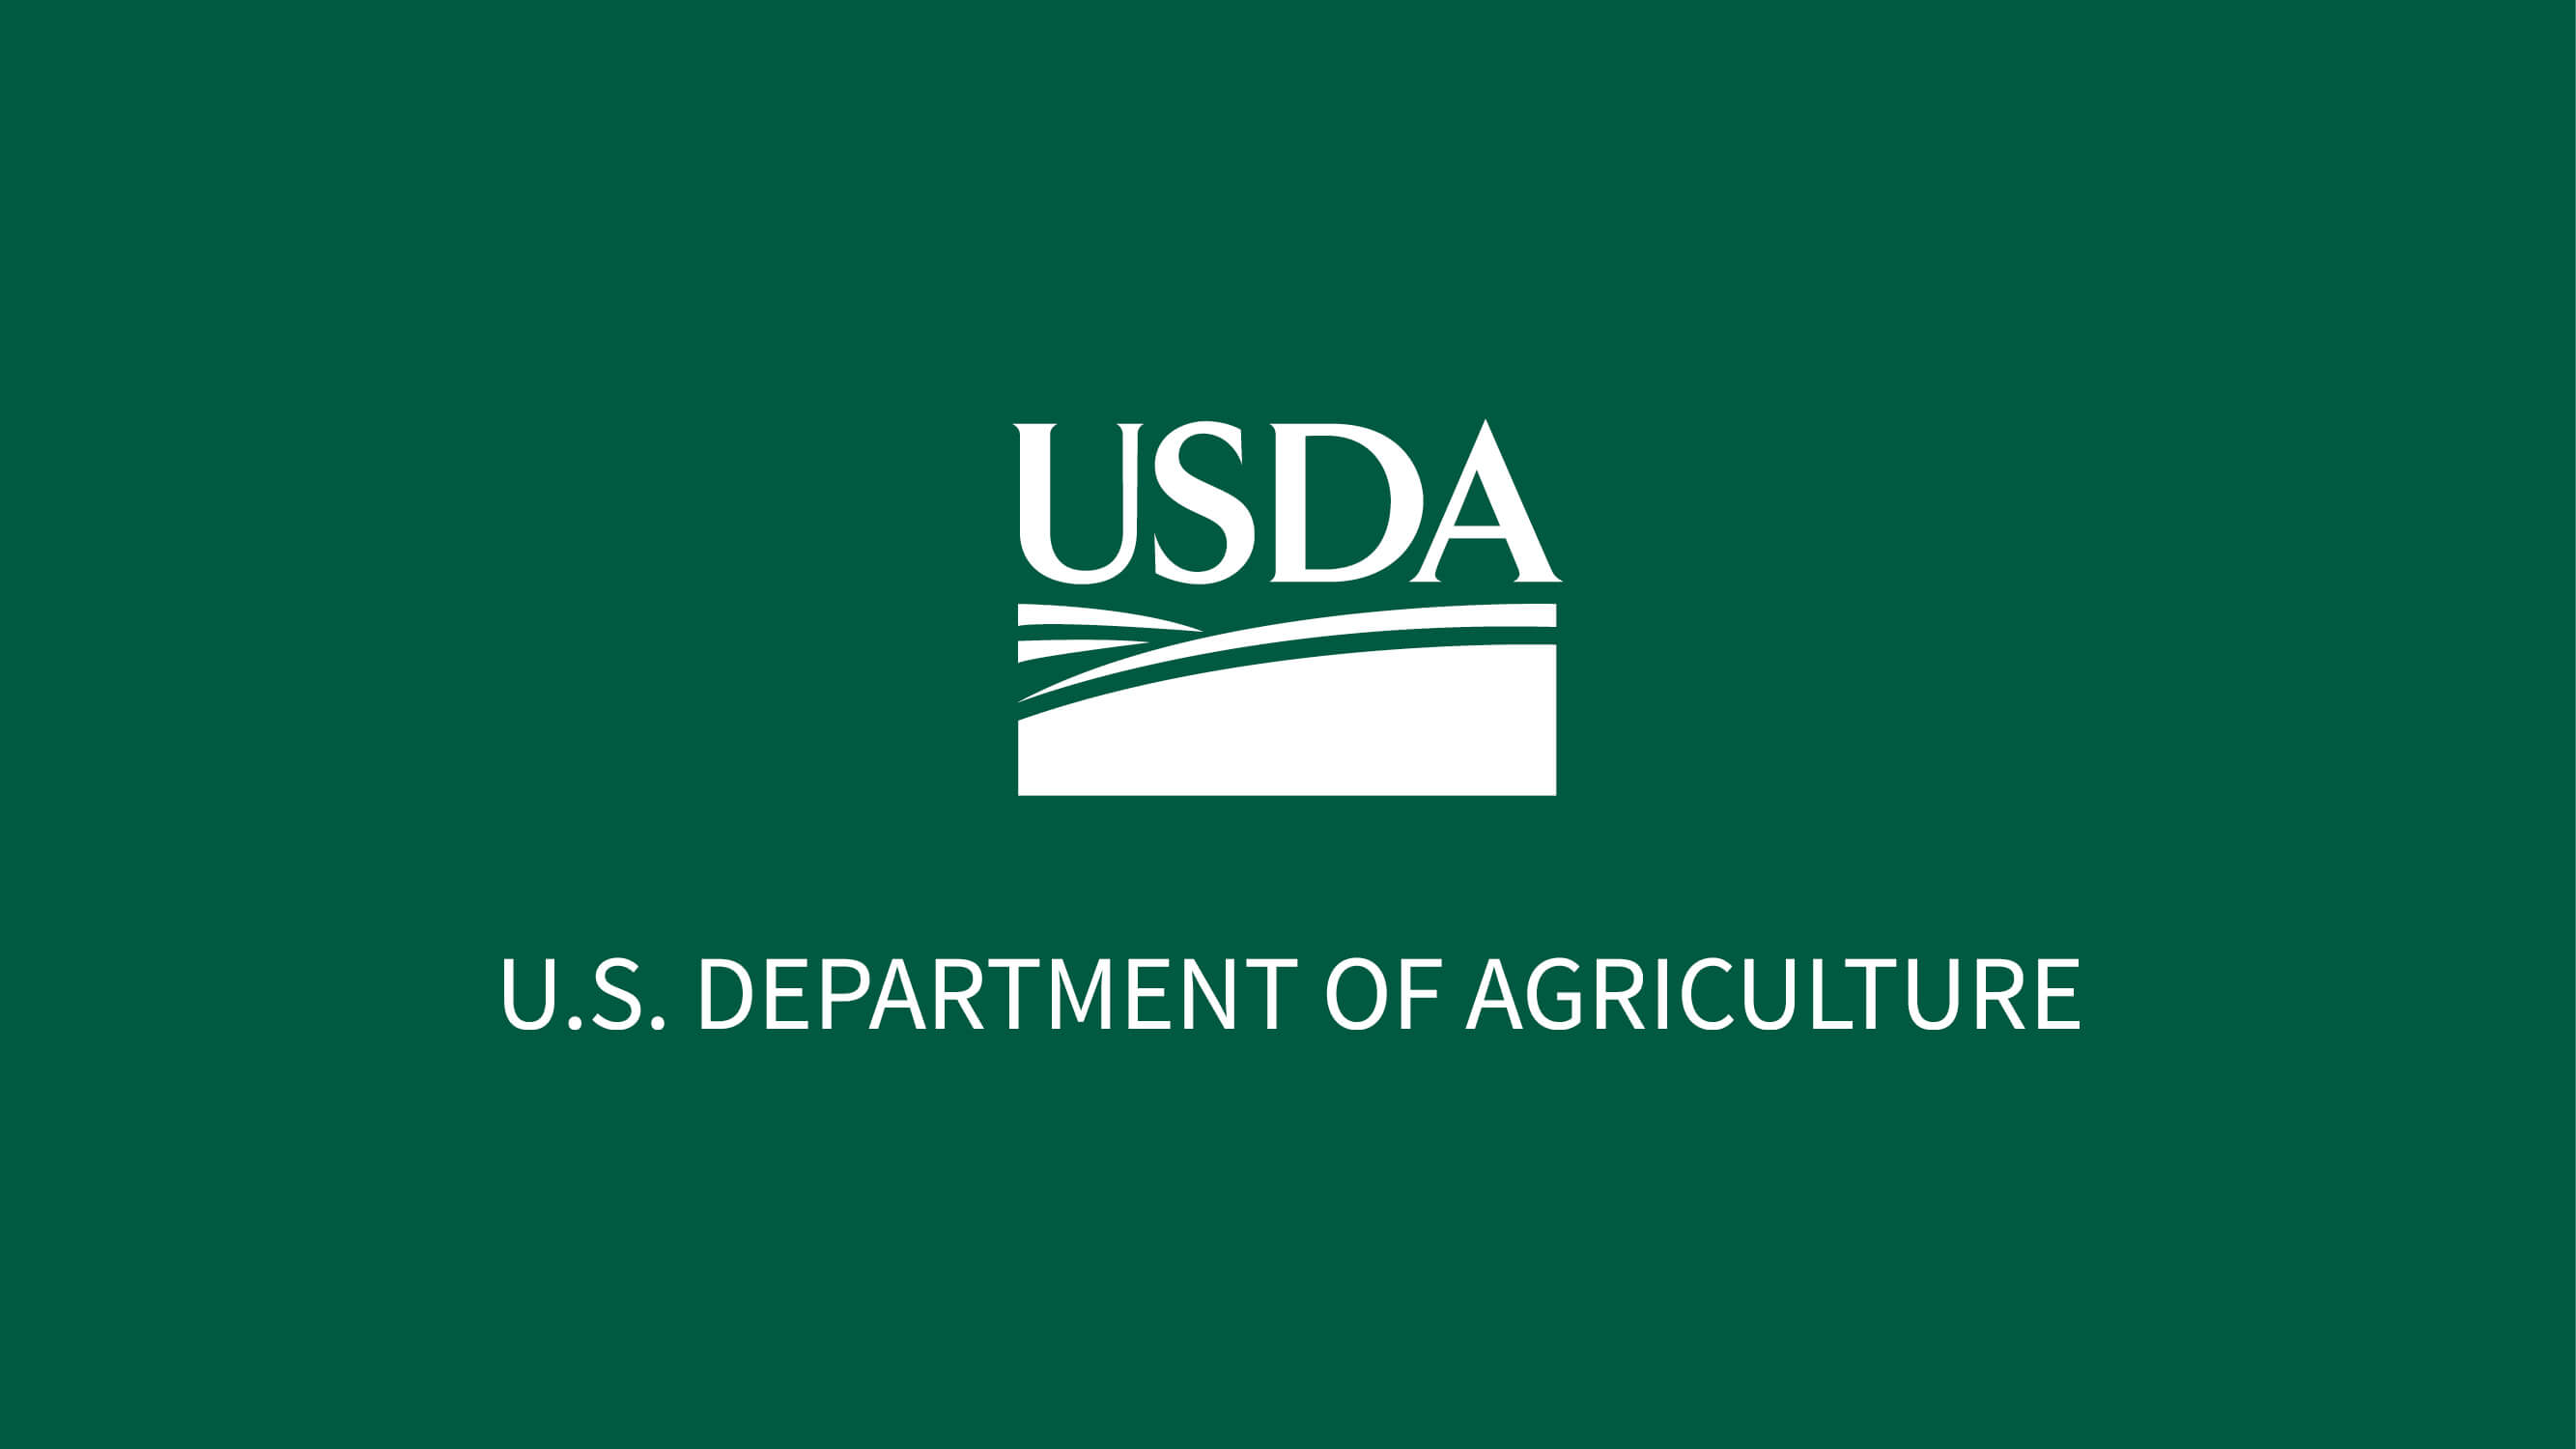 Statement of Agriculture Secretary Tom Vilsack regarding the Intent to Nominate Alexis Taylor as Under Secretary for Trade, Foreign Agricultural Affairs Affairs thumbnail